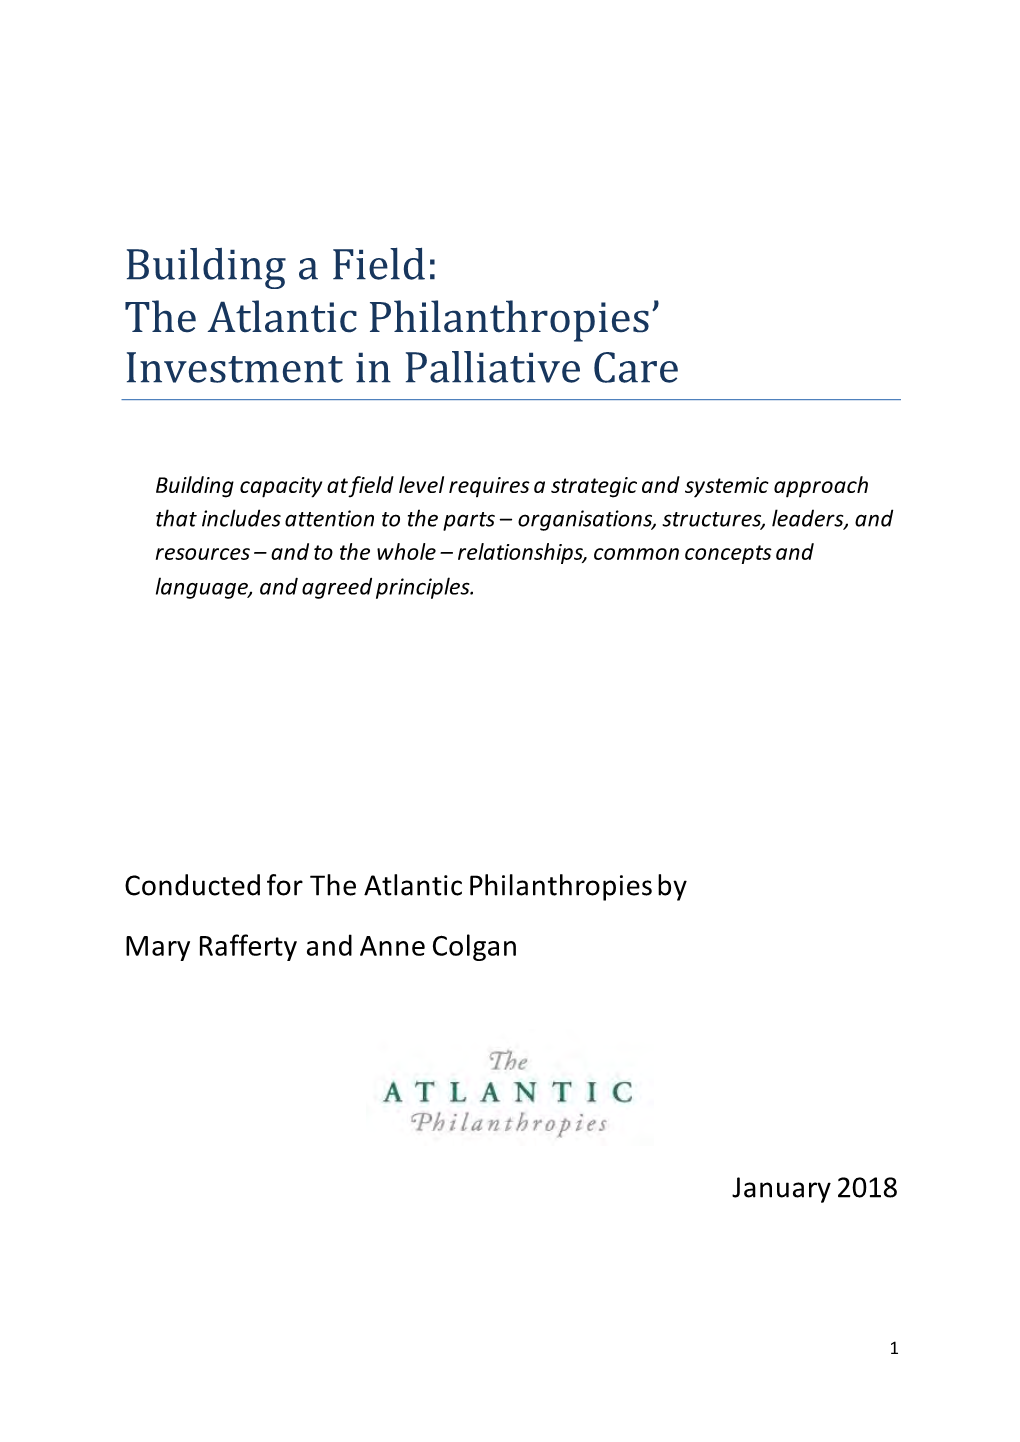 Building a Field: the Atlantic Philanthropies' Investment In